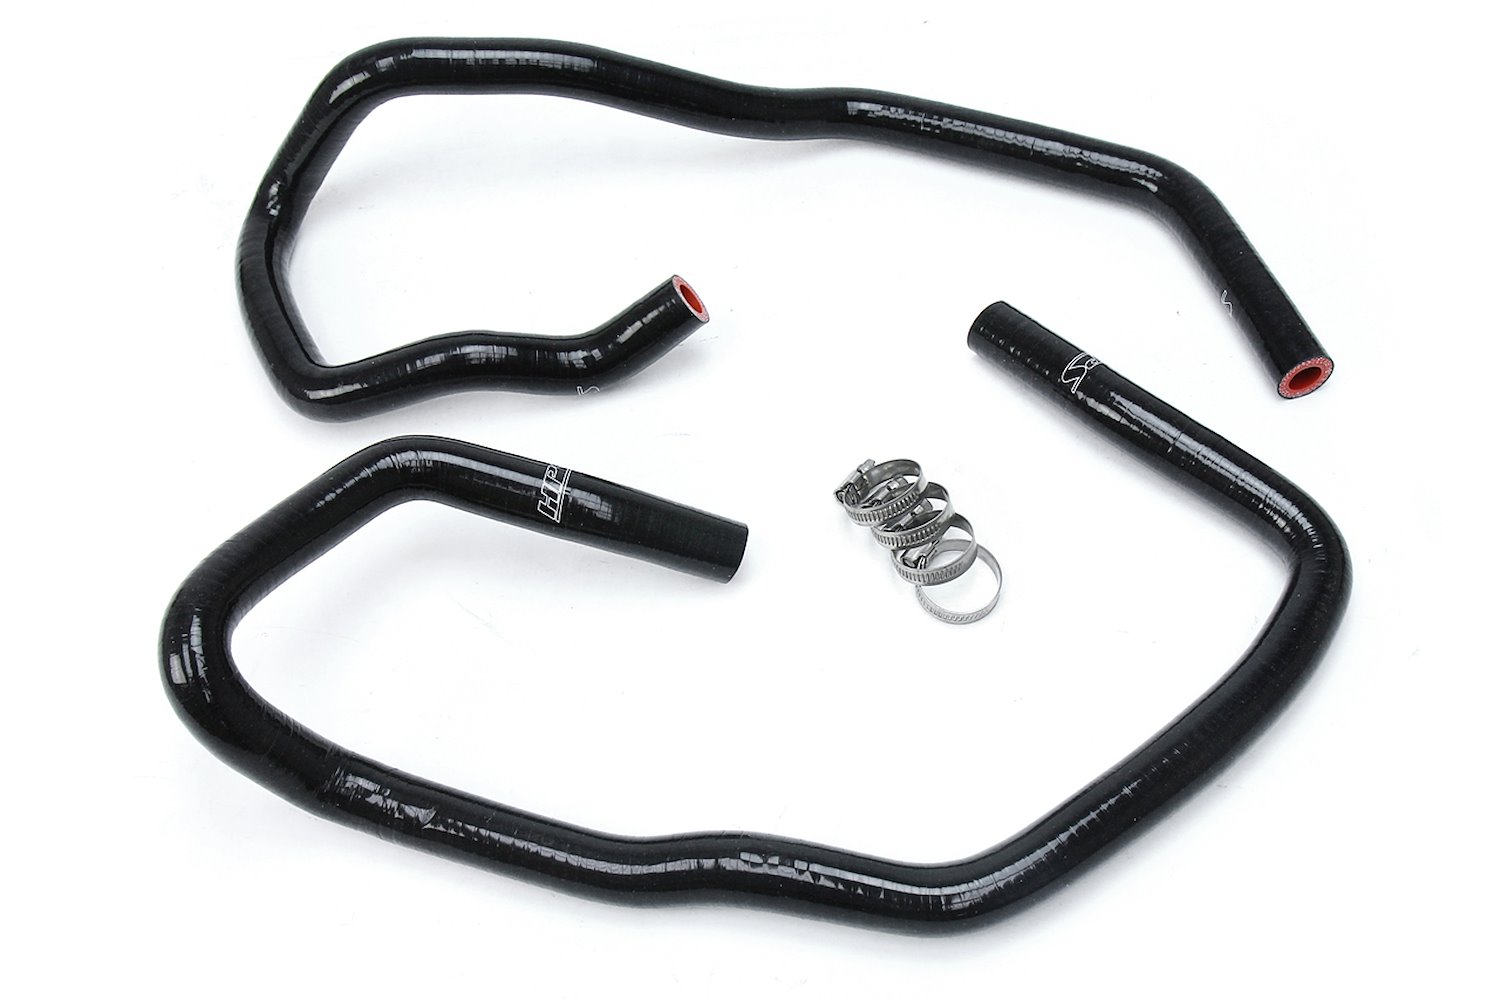 57-1694-BLK Heater Hose Kit, High-Temp 3-Ply Reinforced Silicone, Replace OEM Rubber Heater Coolant Hoses